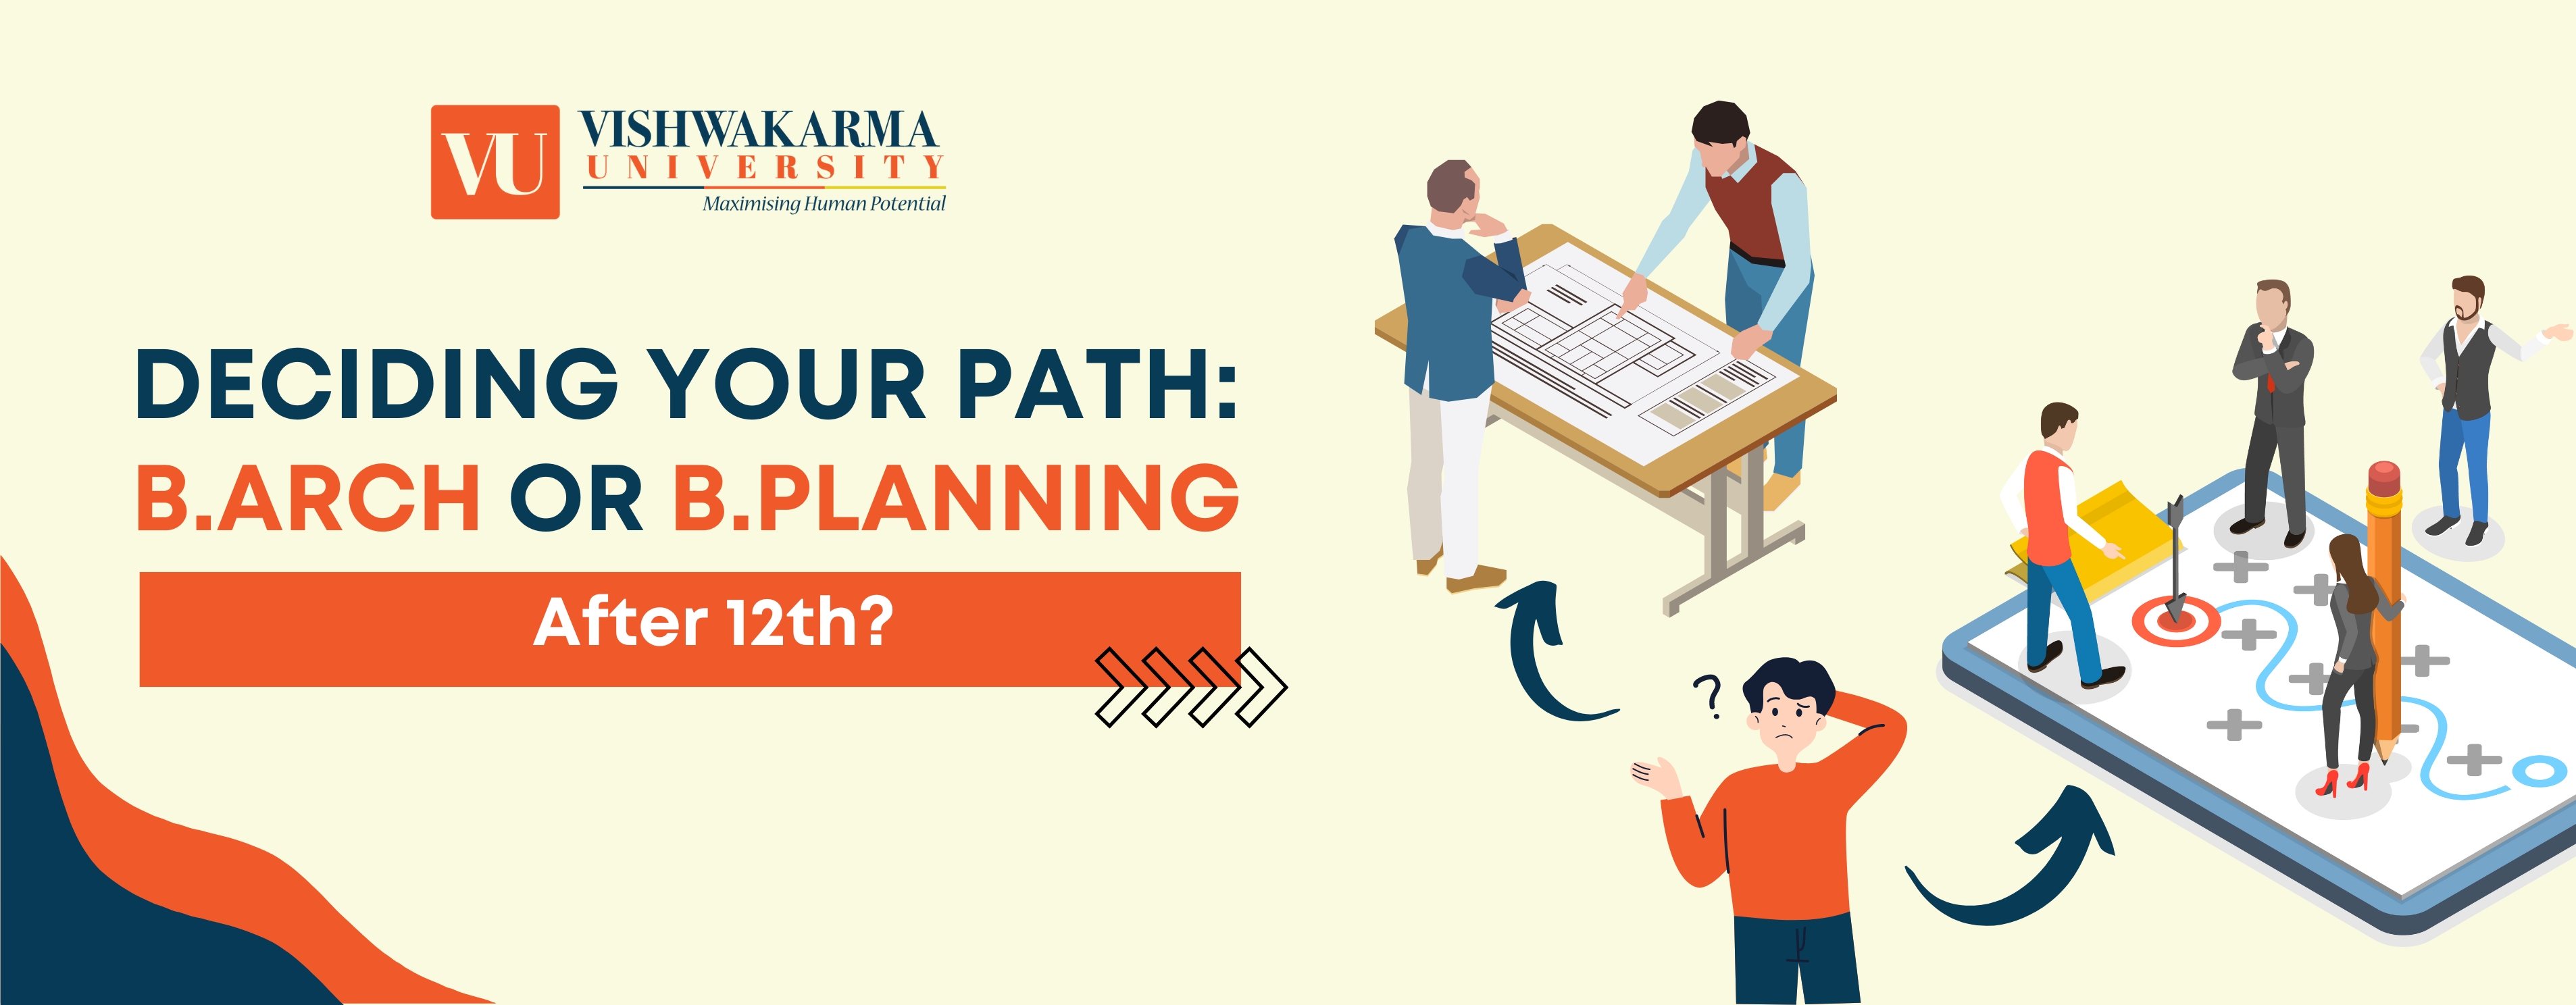 deciding your path b arch or b planning after 12th